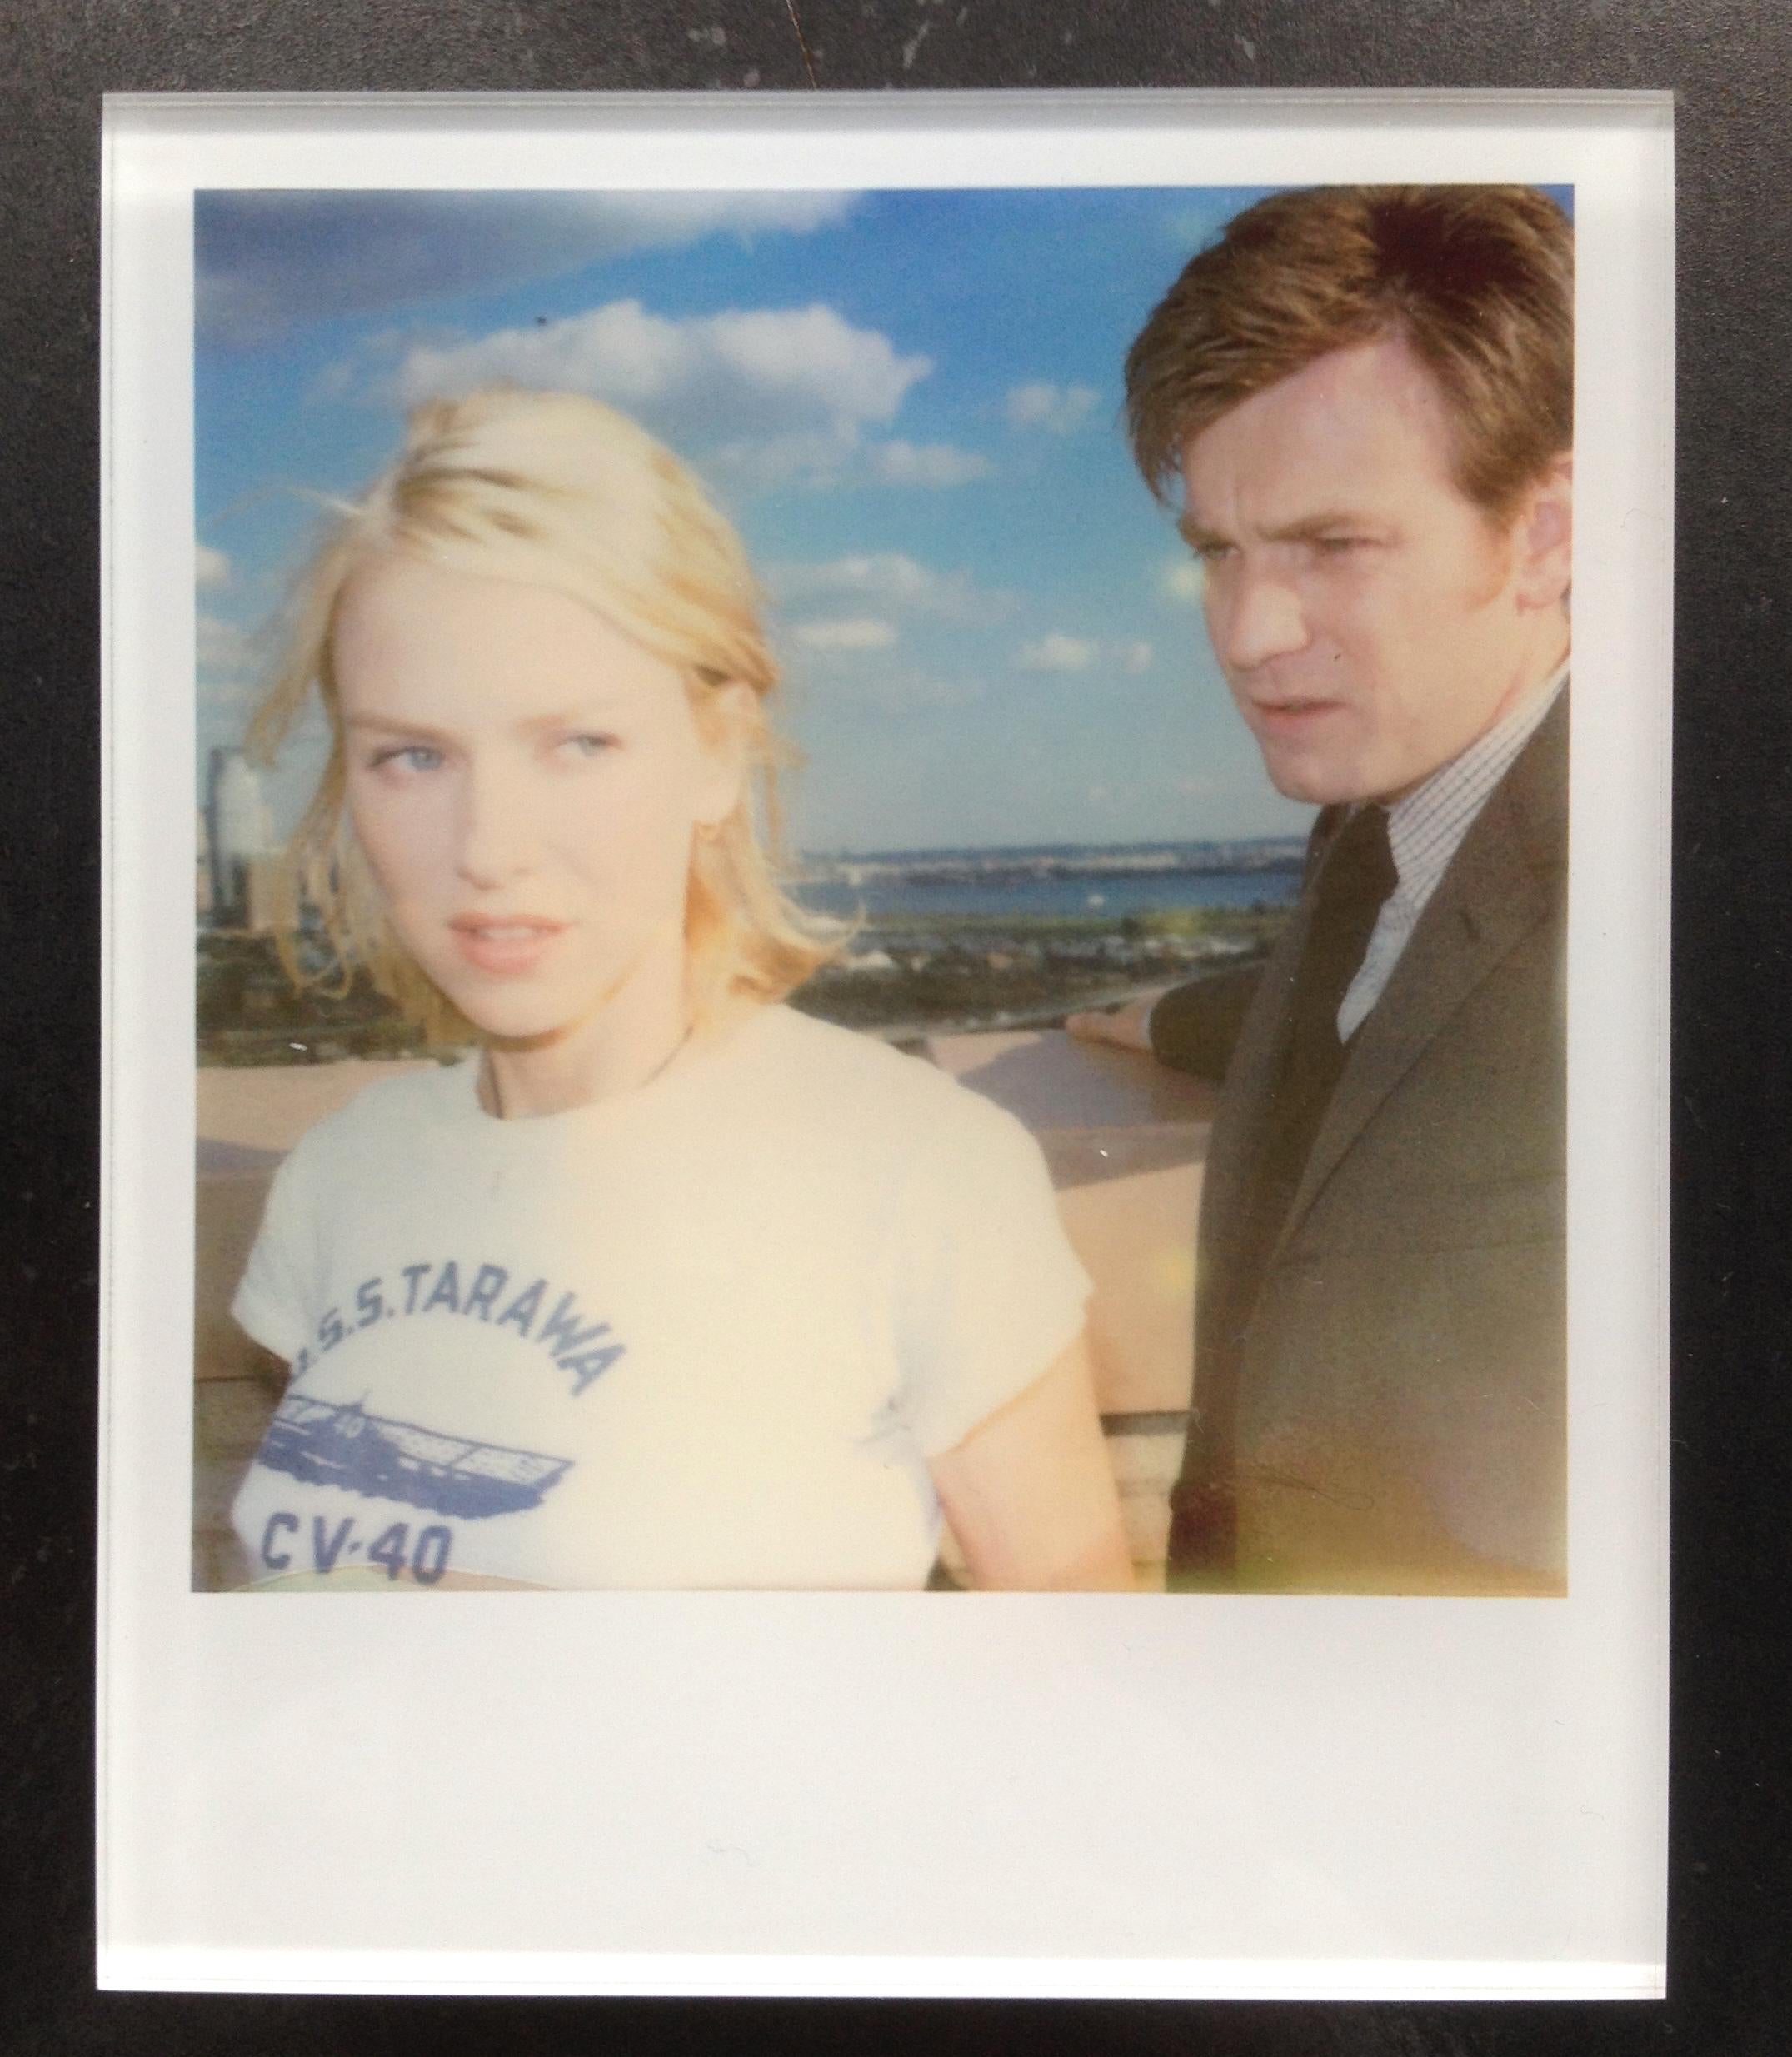 Stefanie Schneider's Minis
'Lila and Sam" (Stay), 2006
signed and signature brand on verso
Lambda digital Color Photographs based on a Polaroid

from the movie 'Stay' by Marc Forster, featuring Ewan McGregor and Naomi Watts.

Polaroid sized open